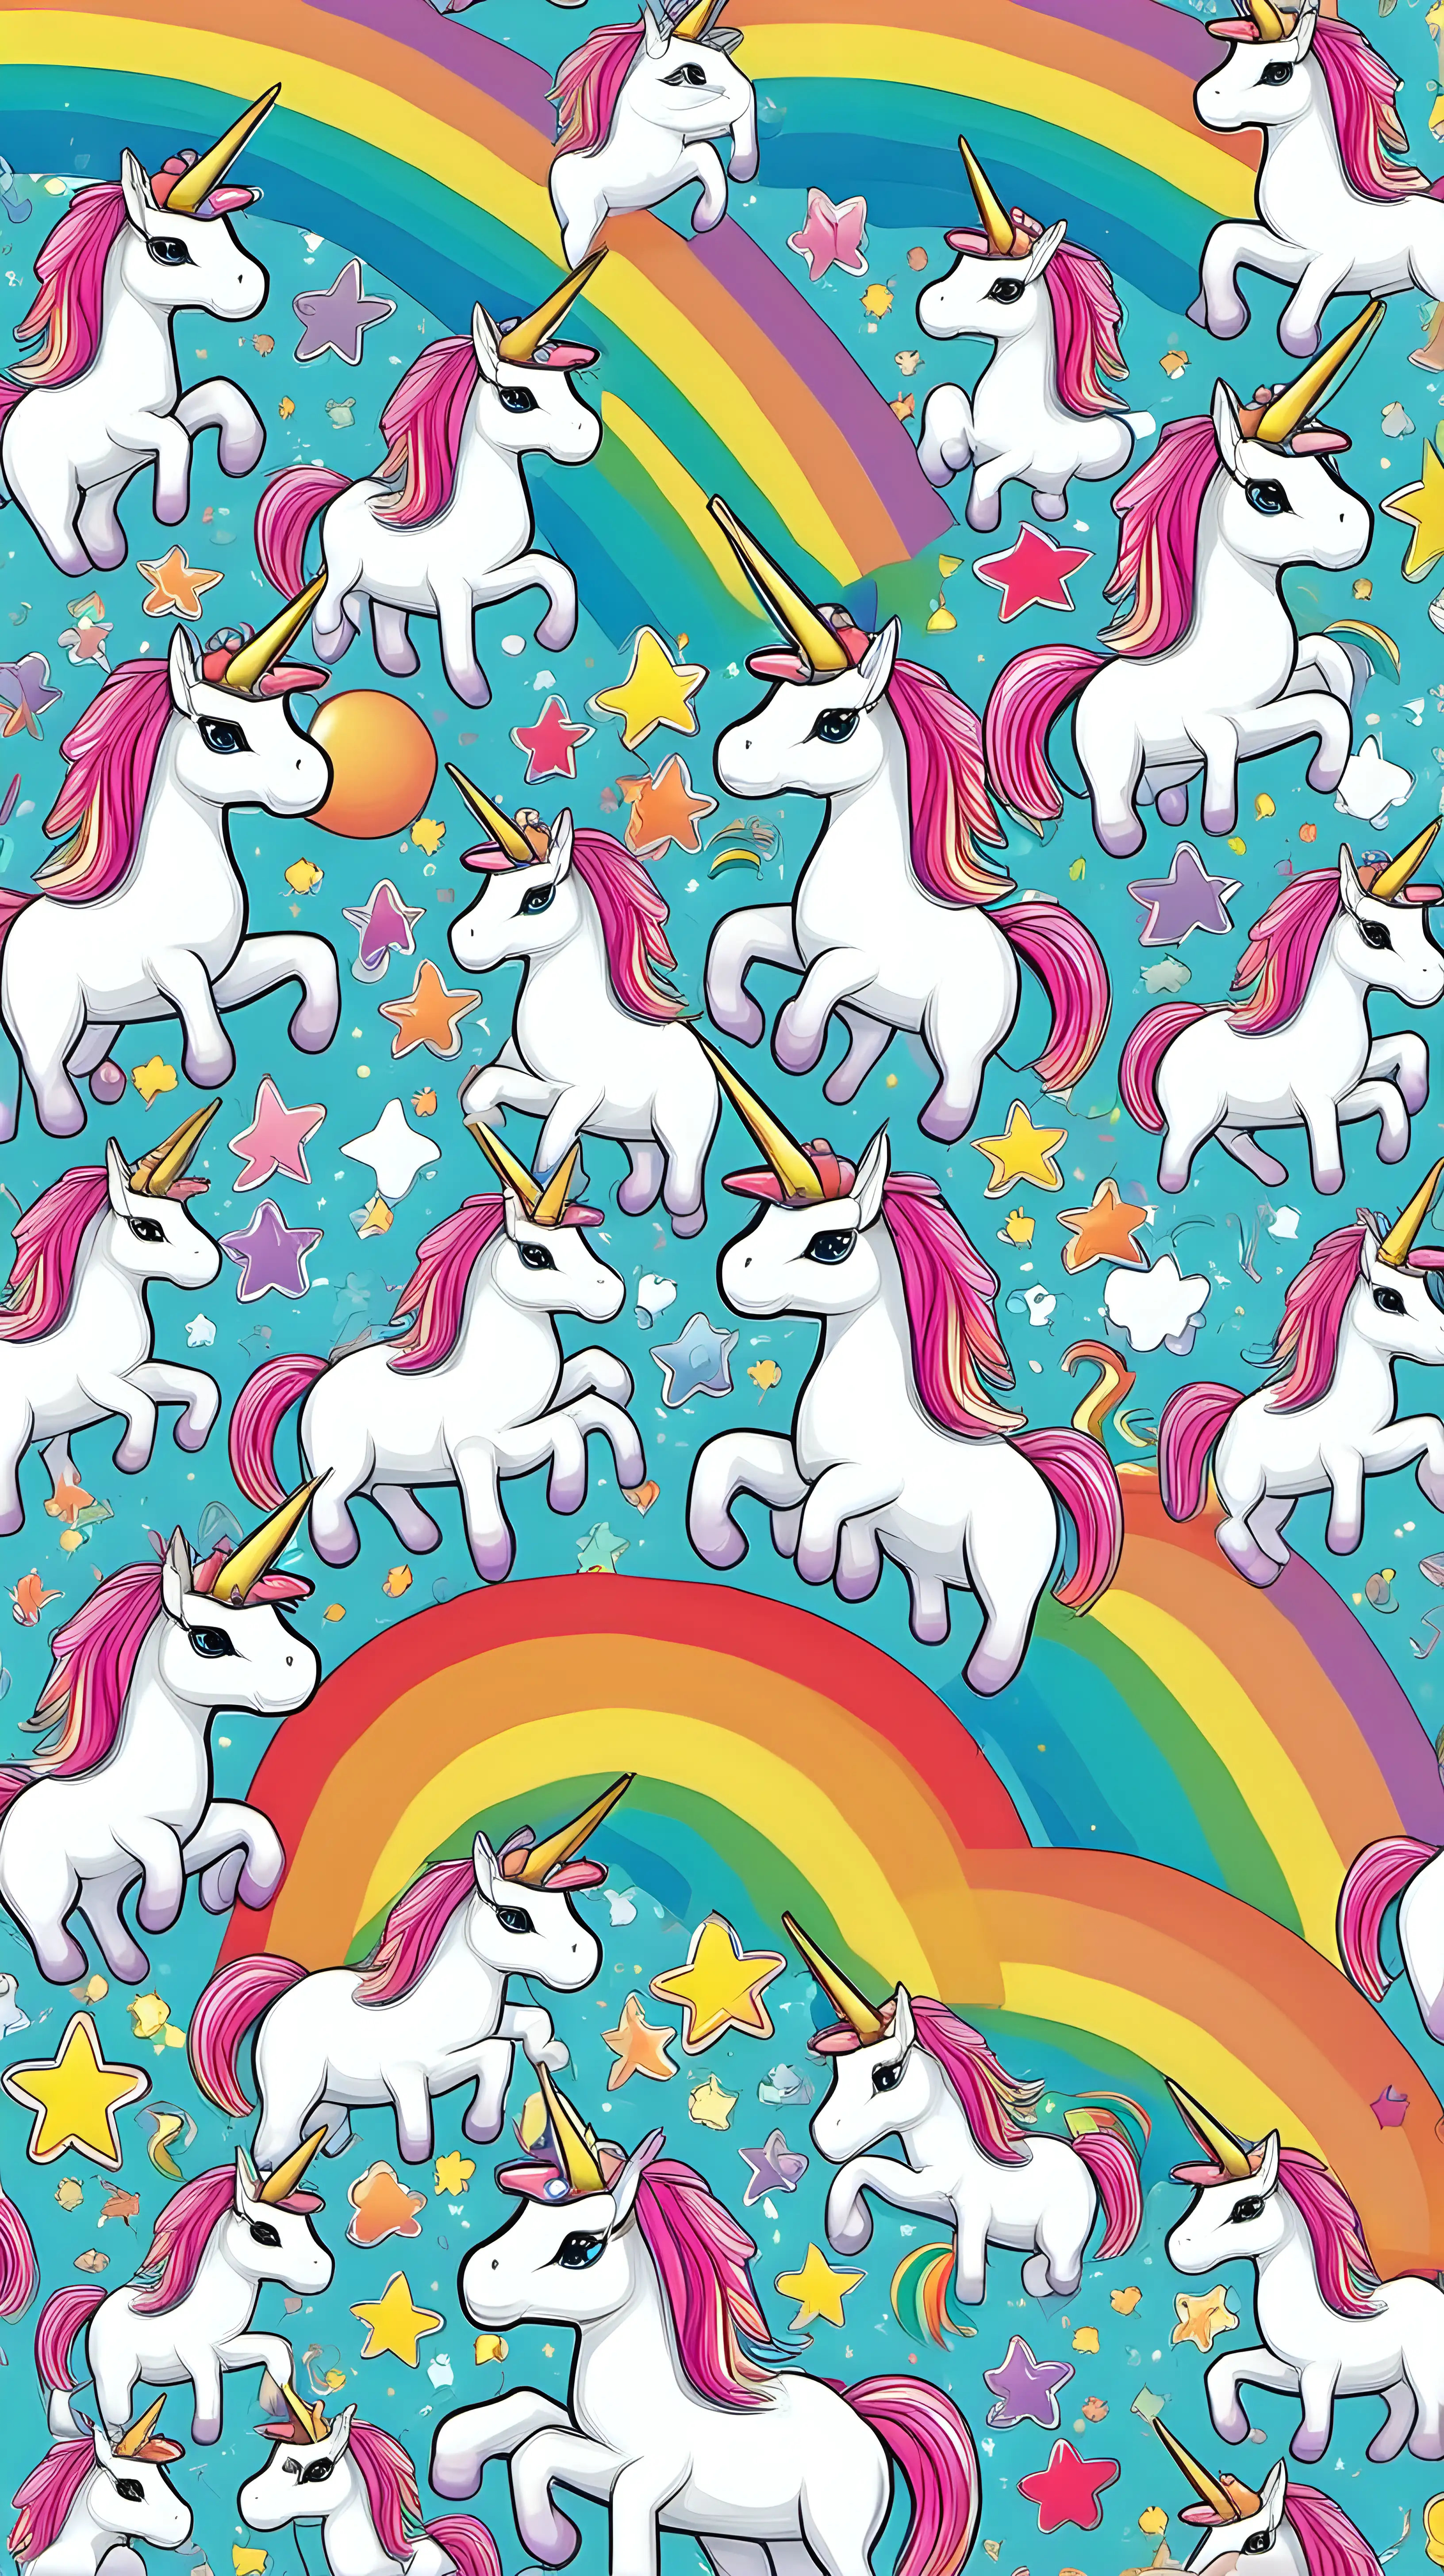 create an ongoing pattern of cartoon unicorns and rainbows